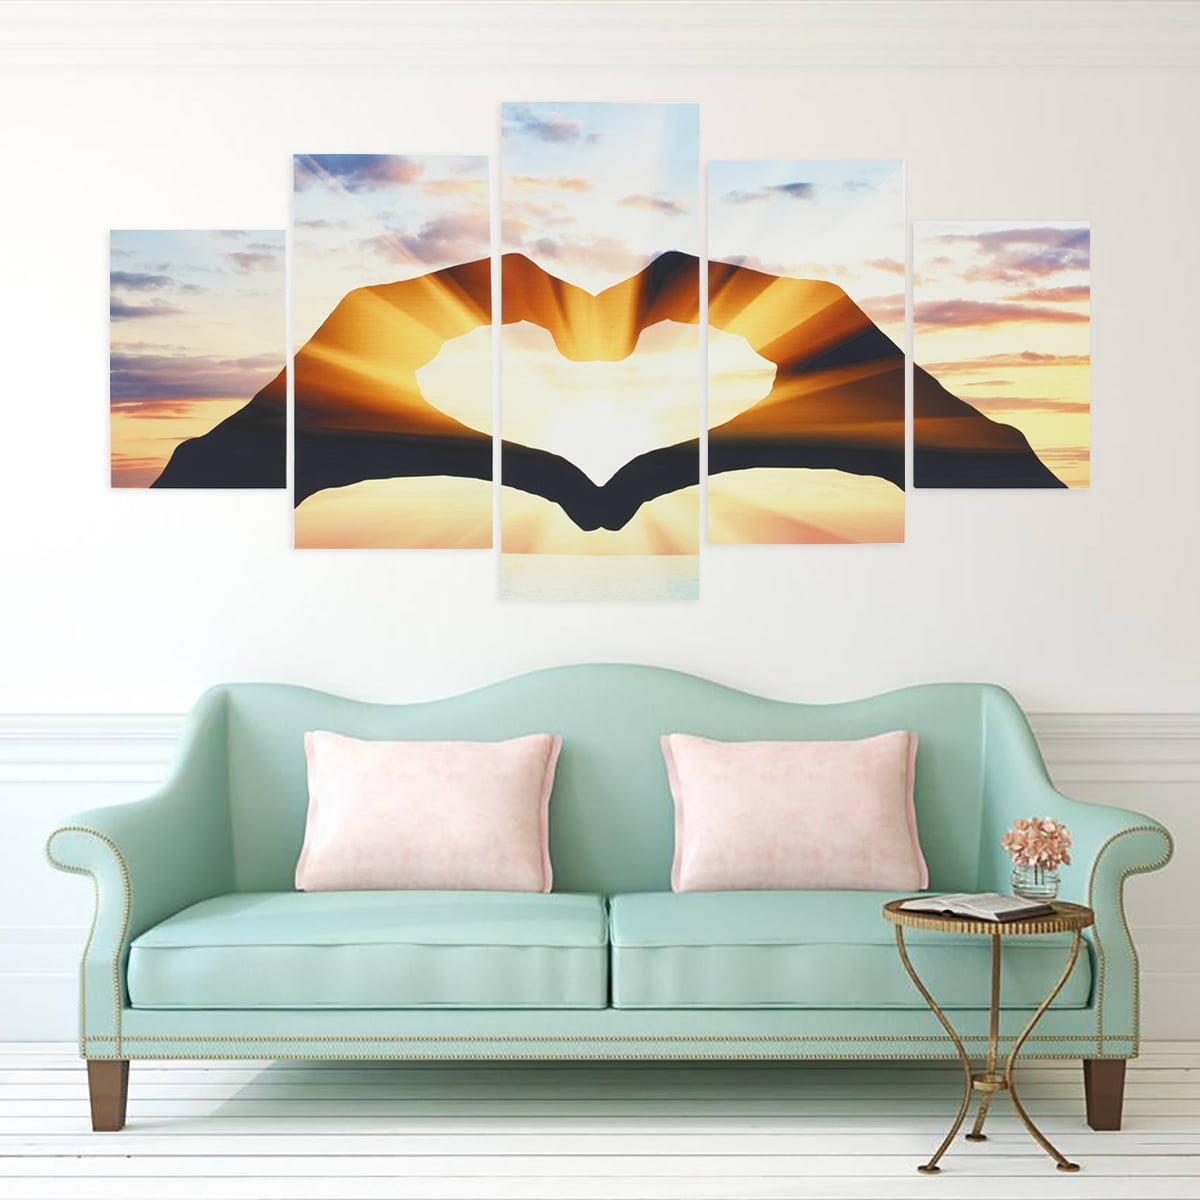 3 Panel Canvas Print Painting Abstract Love Picture Home Wall Art Decor 